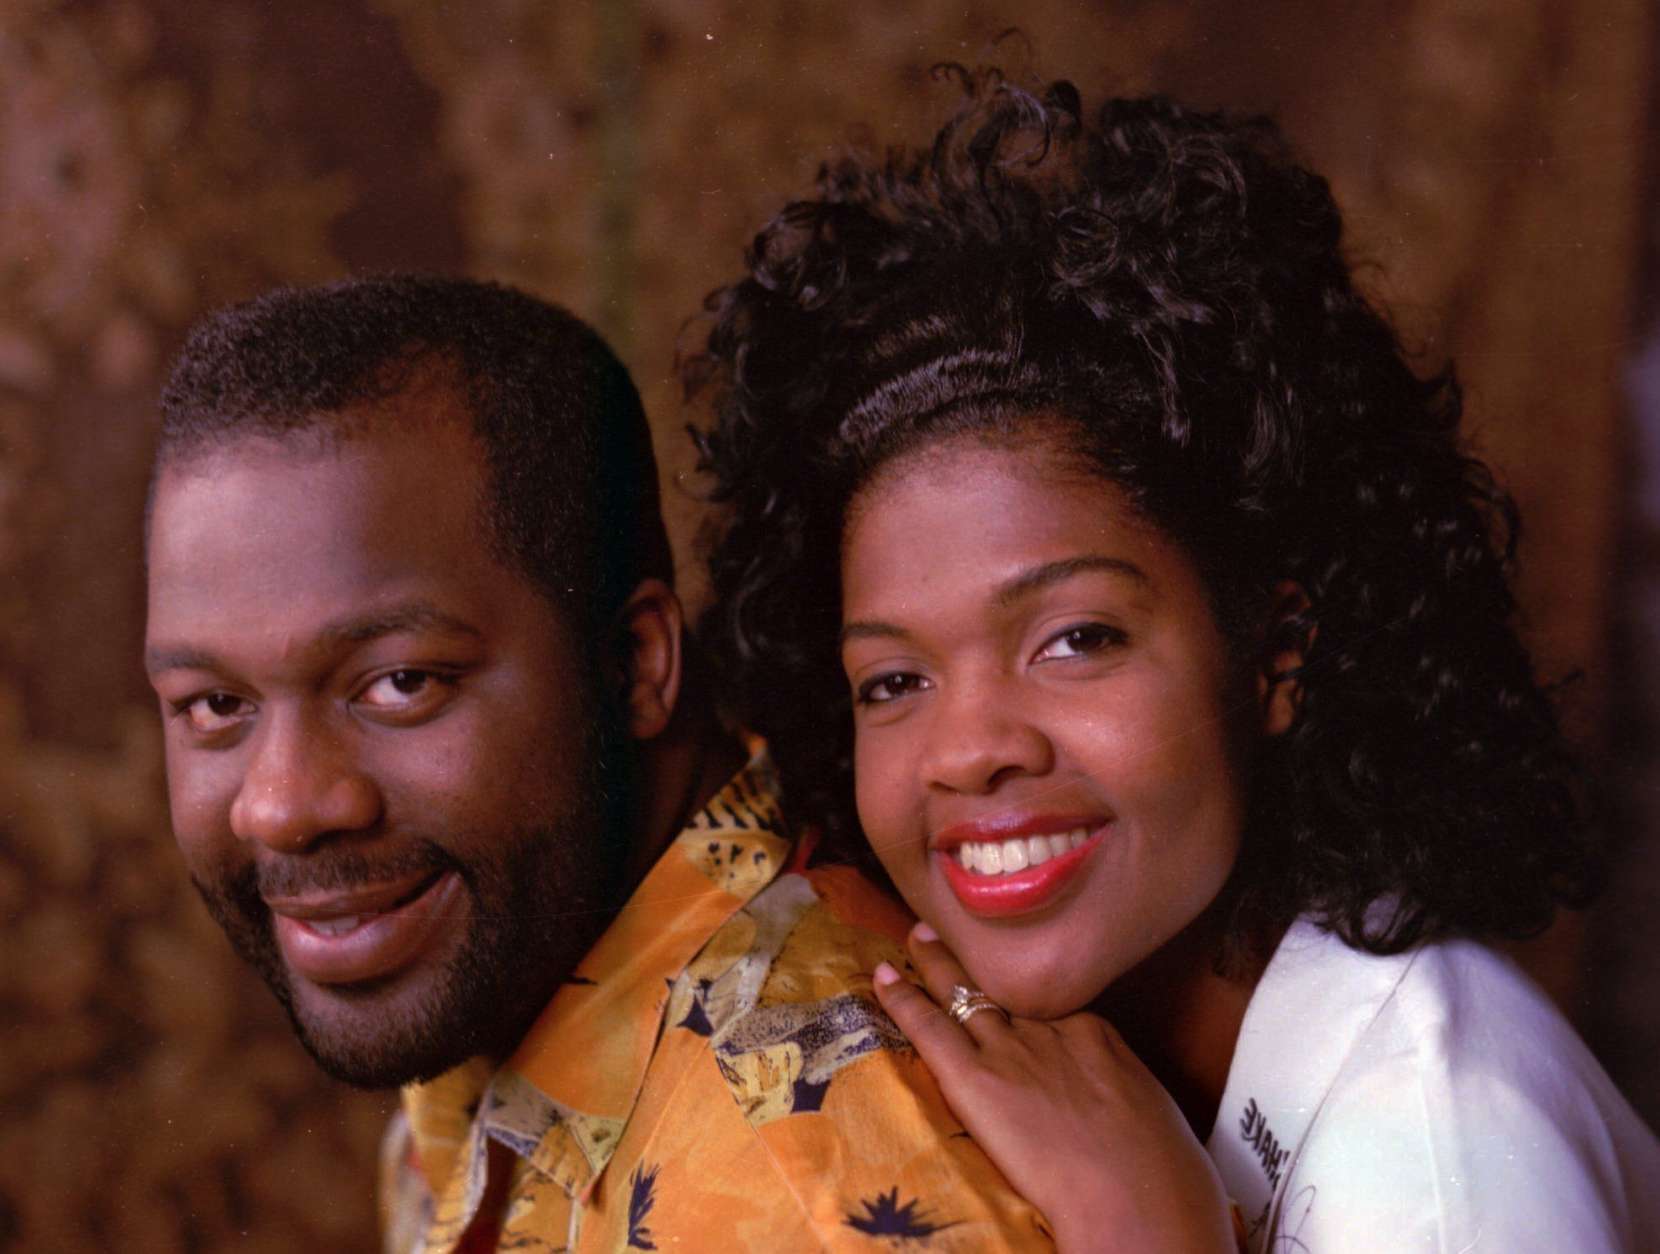 Bebe, left, and Cece Winans pose during an August 1991 interview in New York City. The Grammy-winning siblings emerged from a musical family a decade ago to achieve success as gospel singers. (AP photo/Dana Tynan)